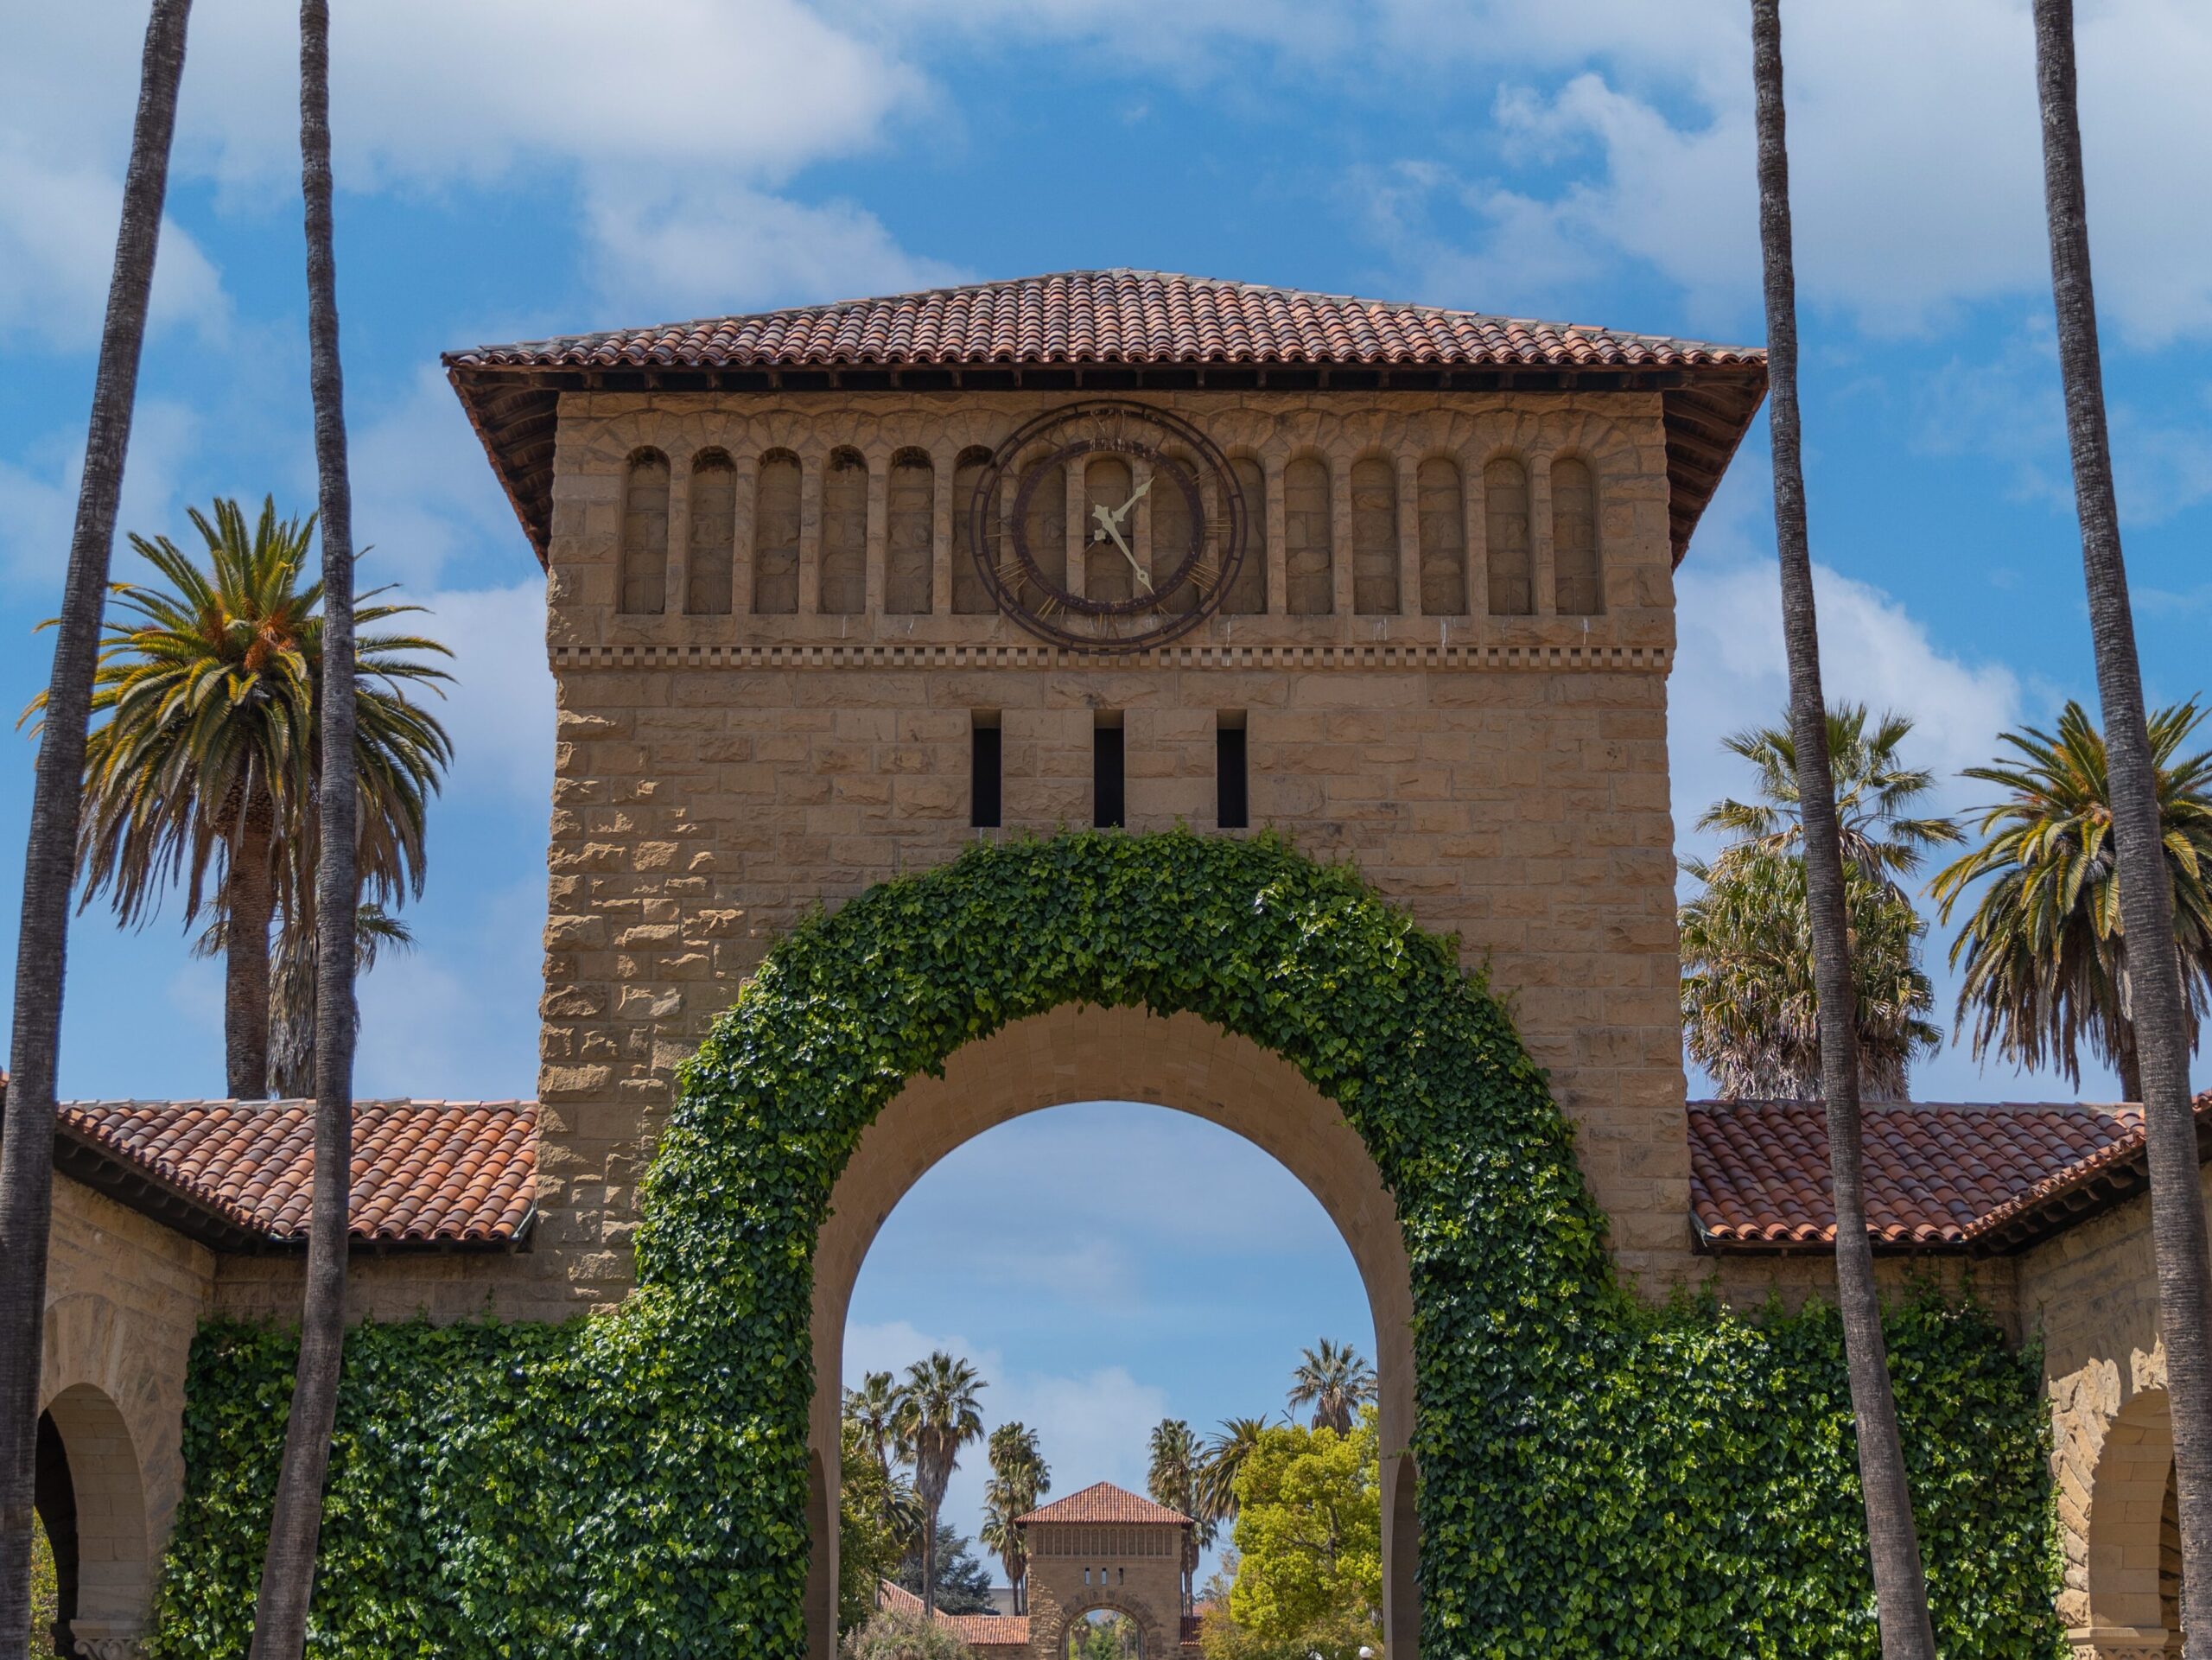 stanford admissions